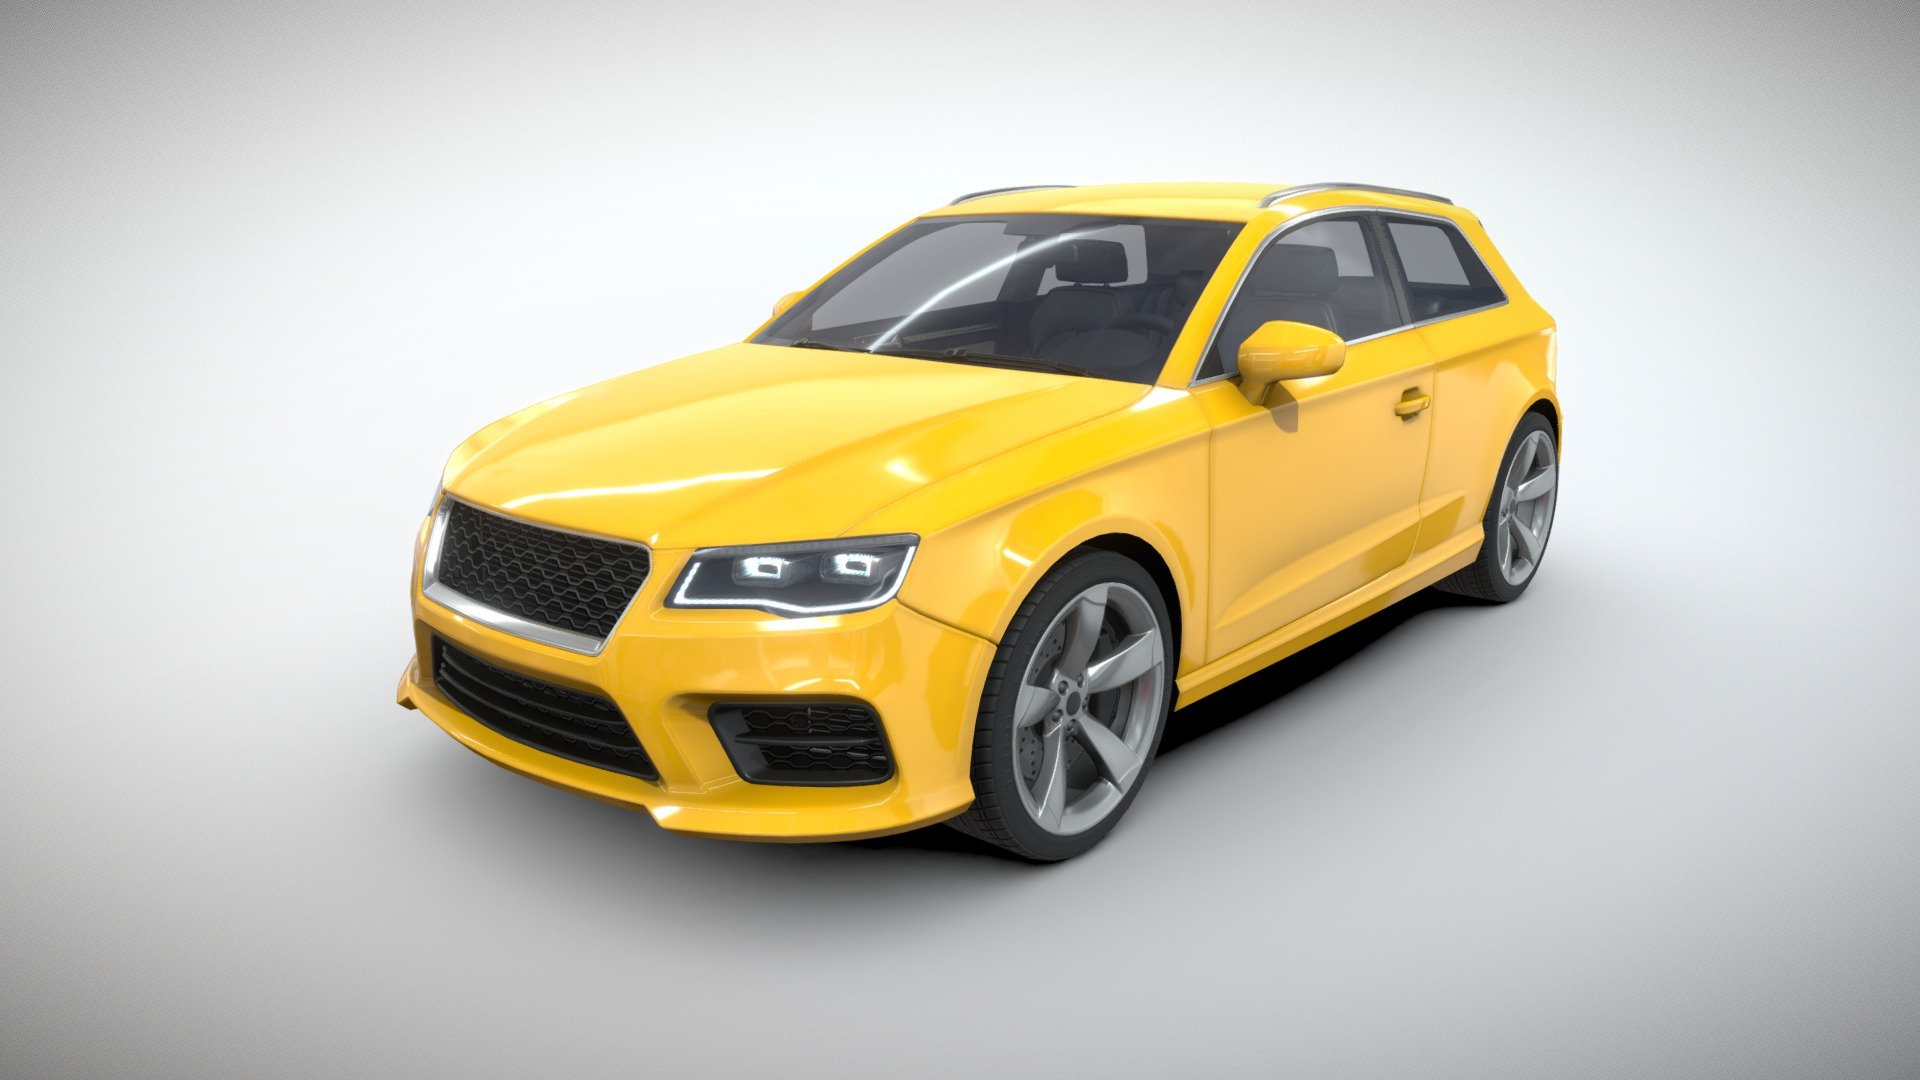 High Detailed Realistic Car 3D Model Made for Unity Asset Store 3d model